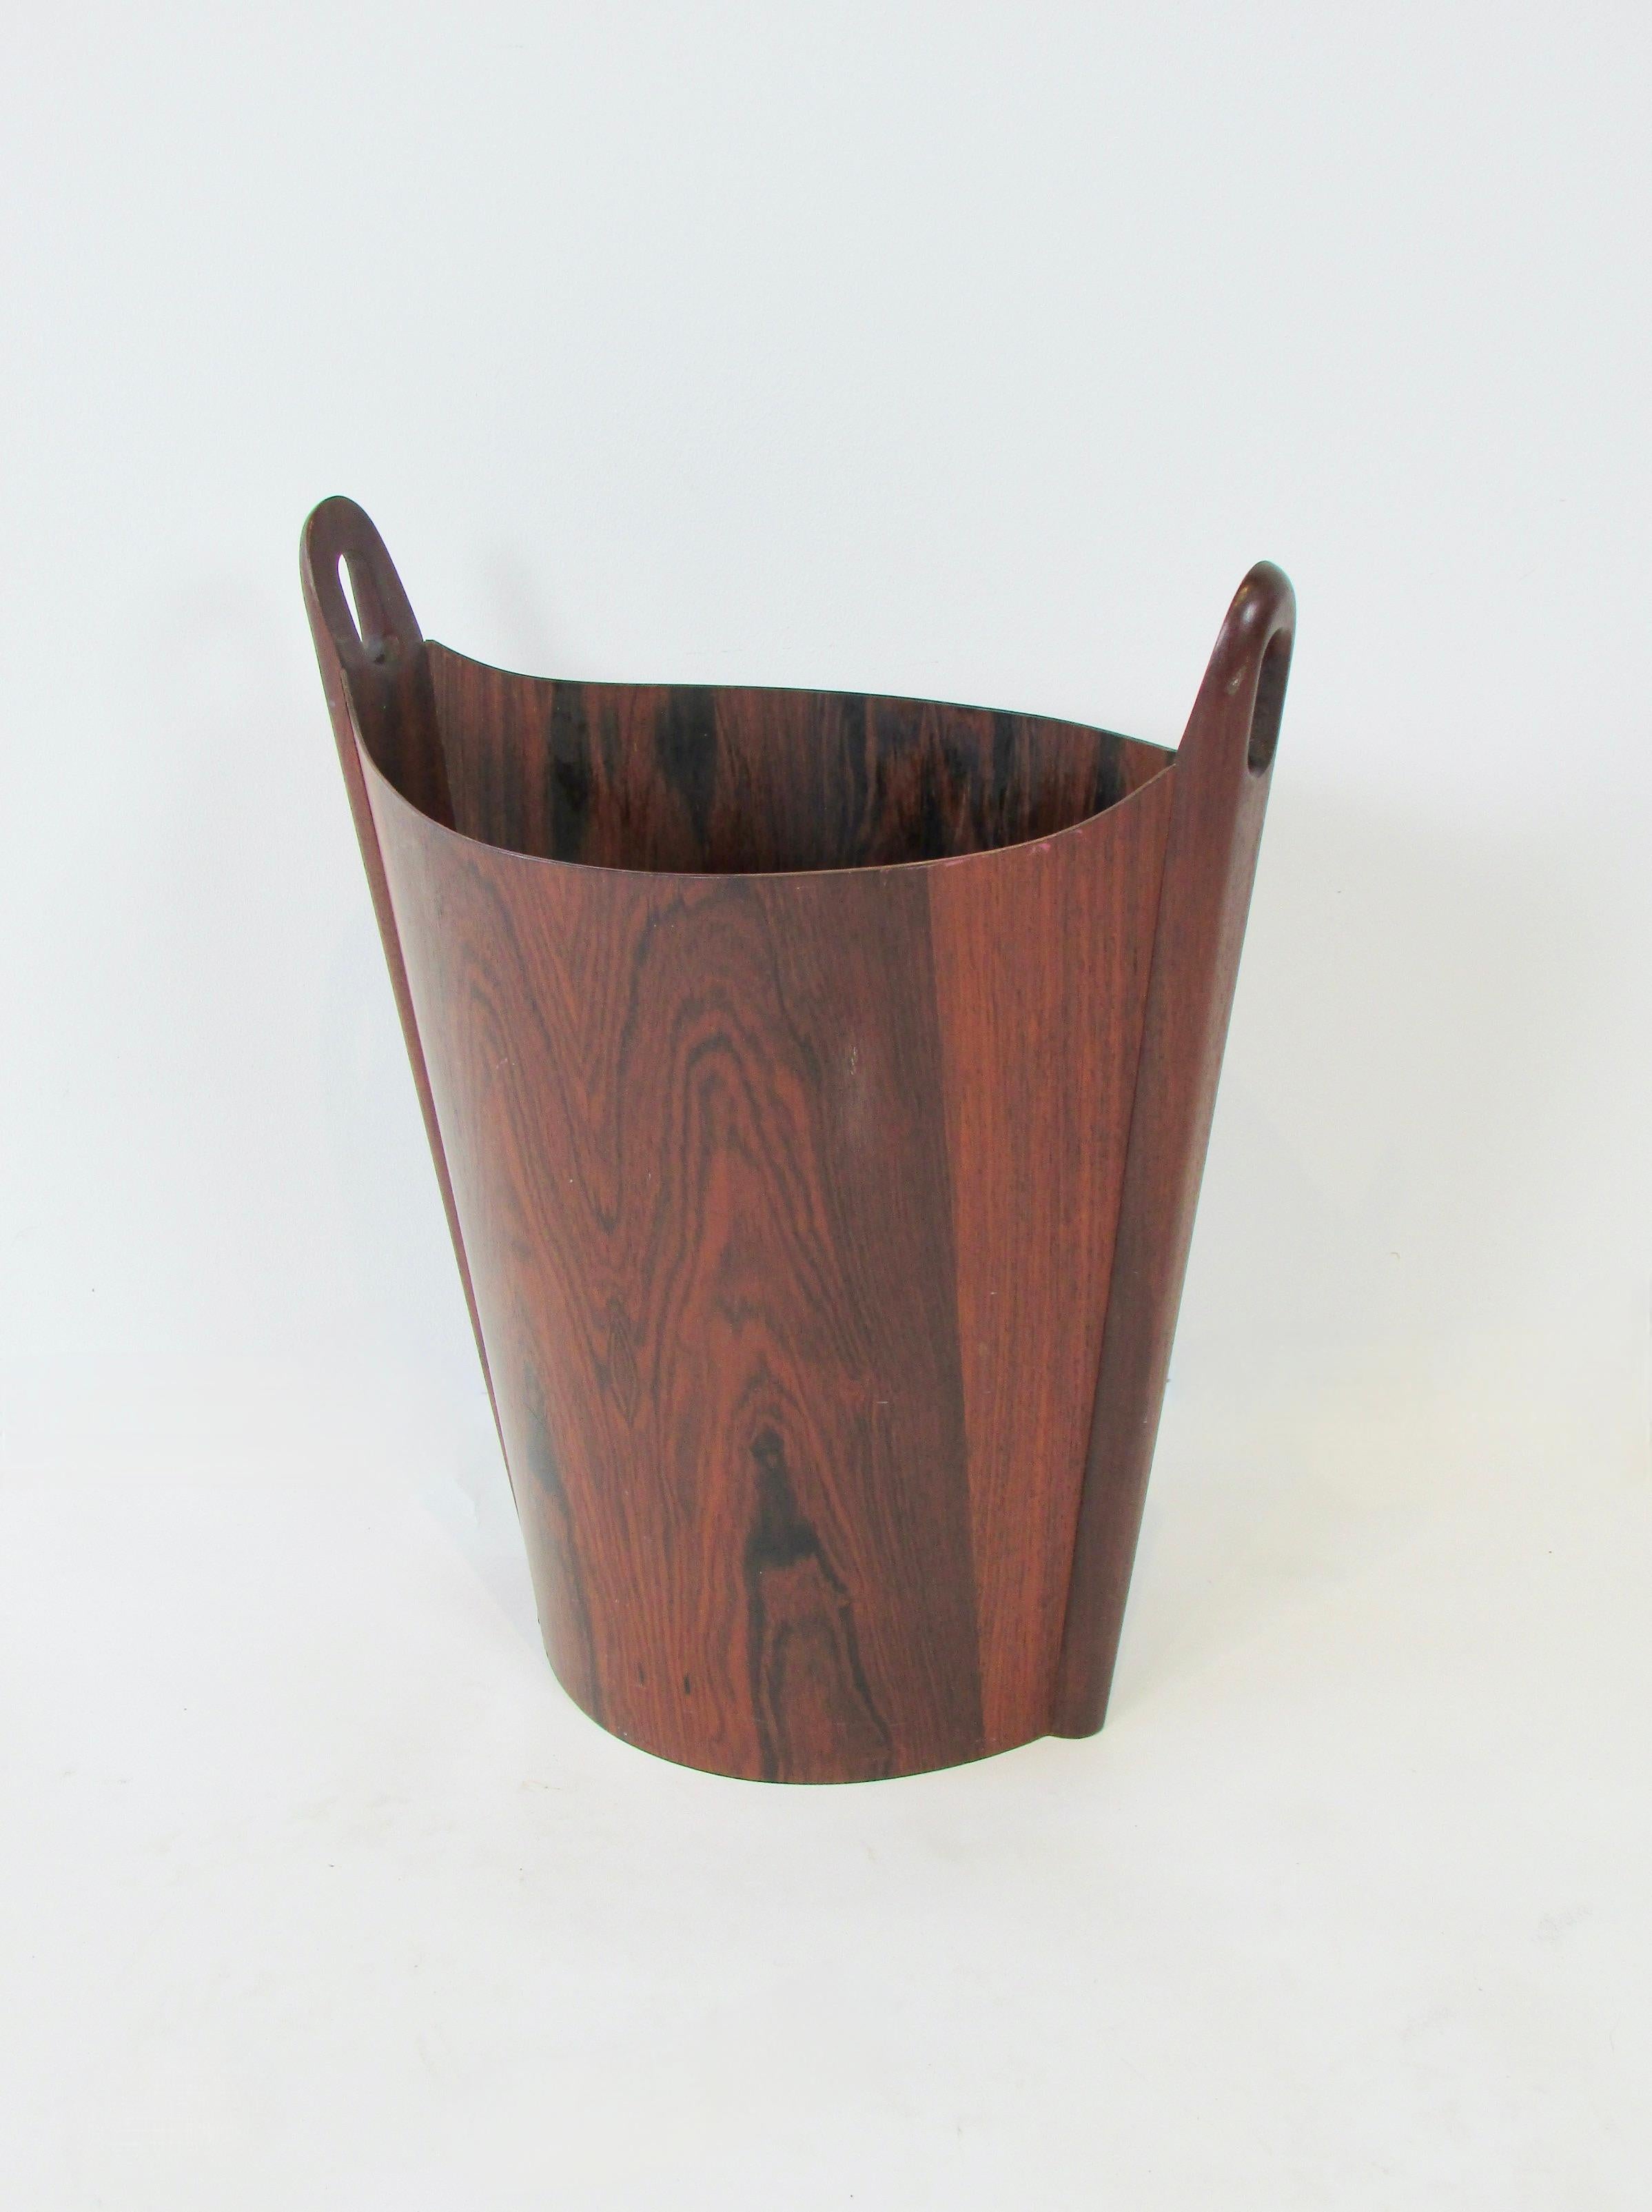 Beautifully grained rosewood trash can. Designed in Norway by Einar Barnes for P.S. Hegen.